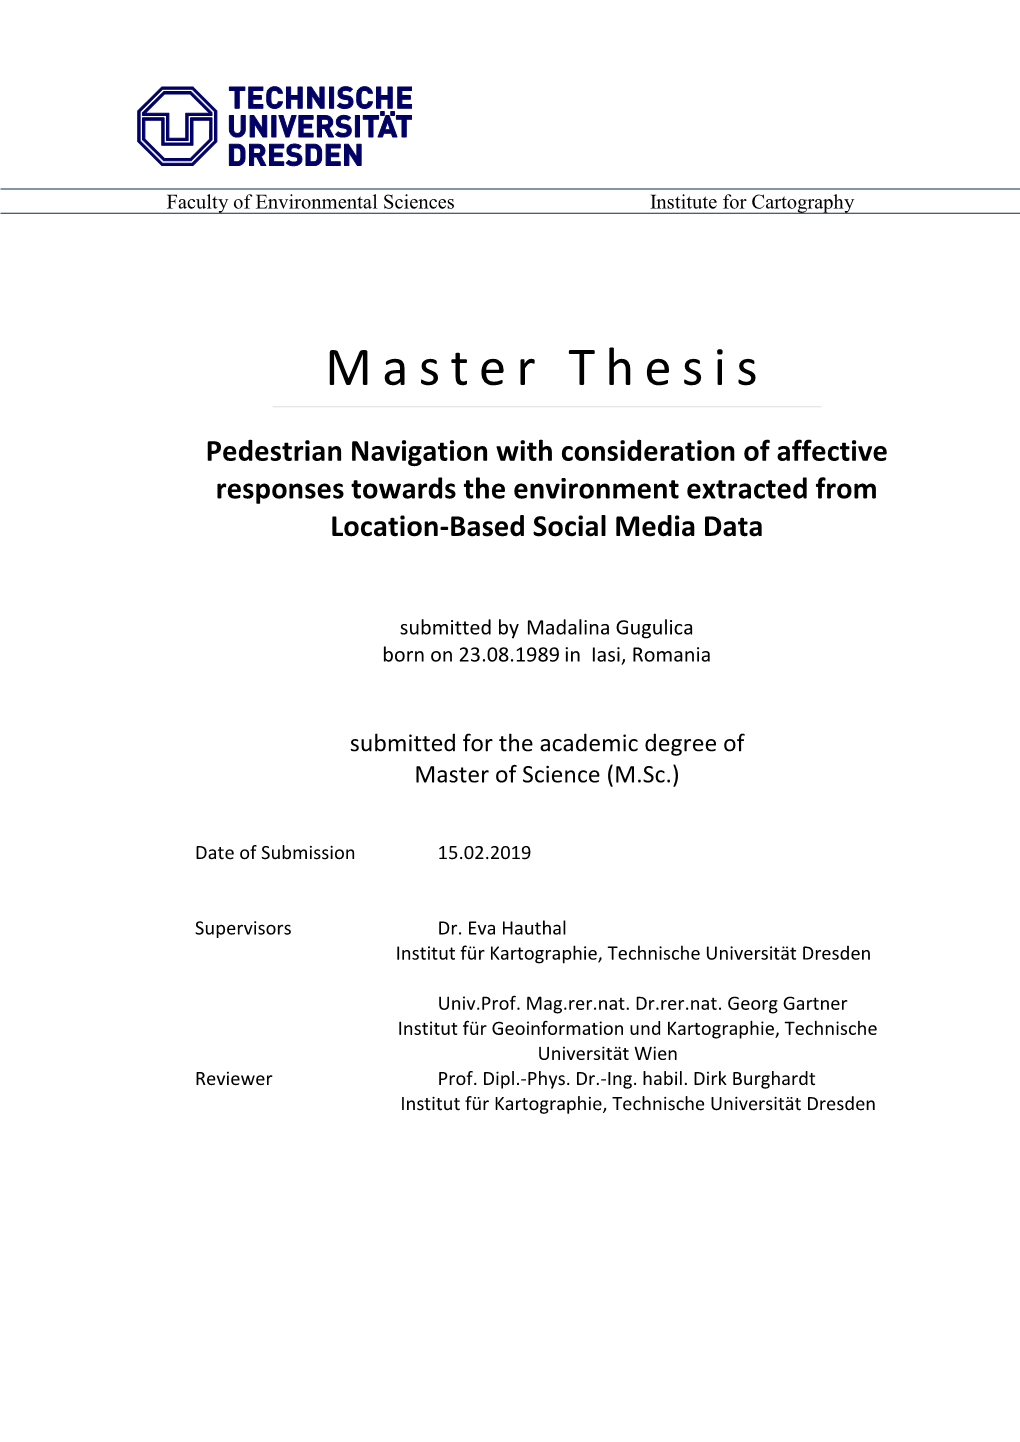 Pedestrian Navigation with Consideration of Affective Responses Towards the Environment Extracted from Location-Based Social Media Data